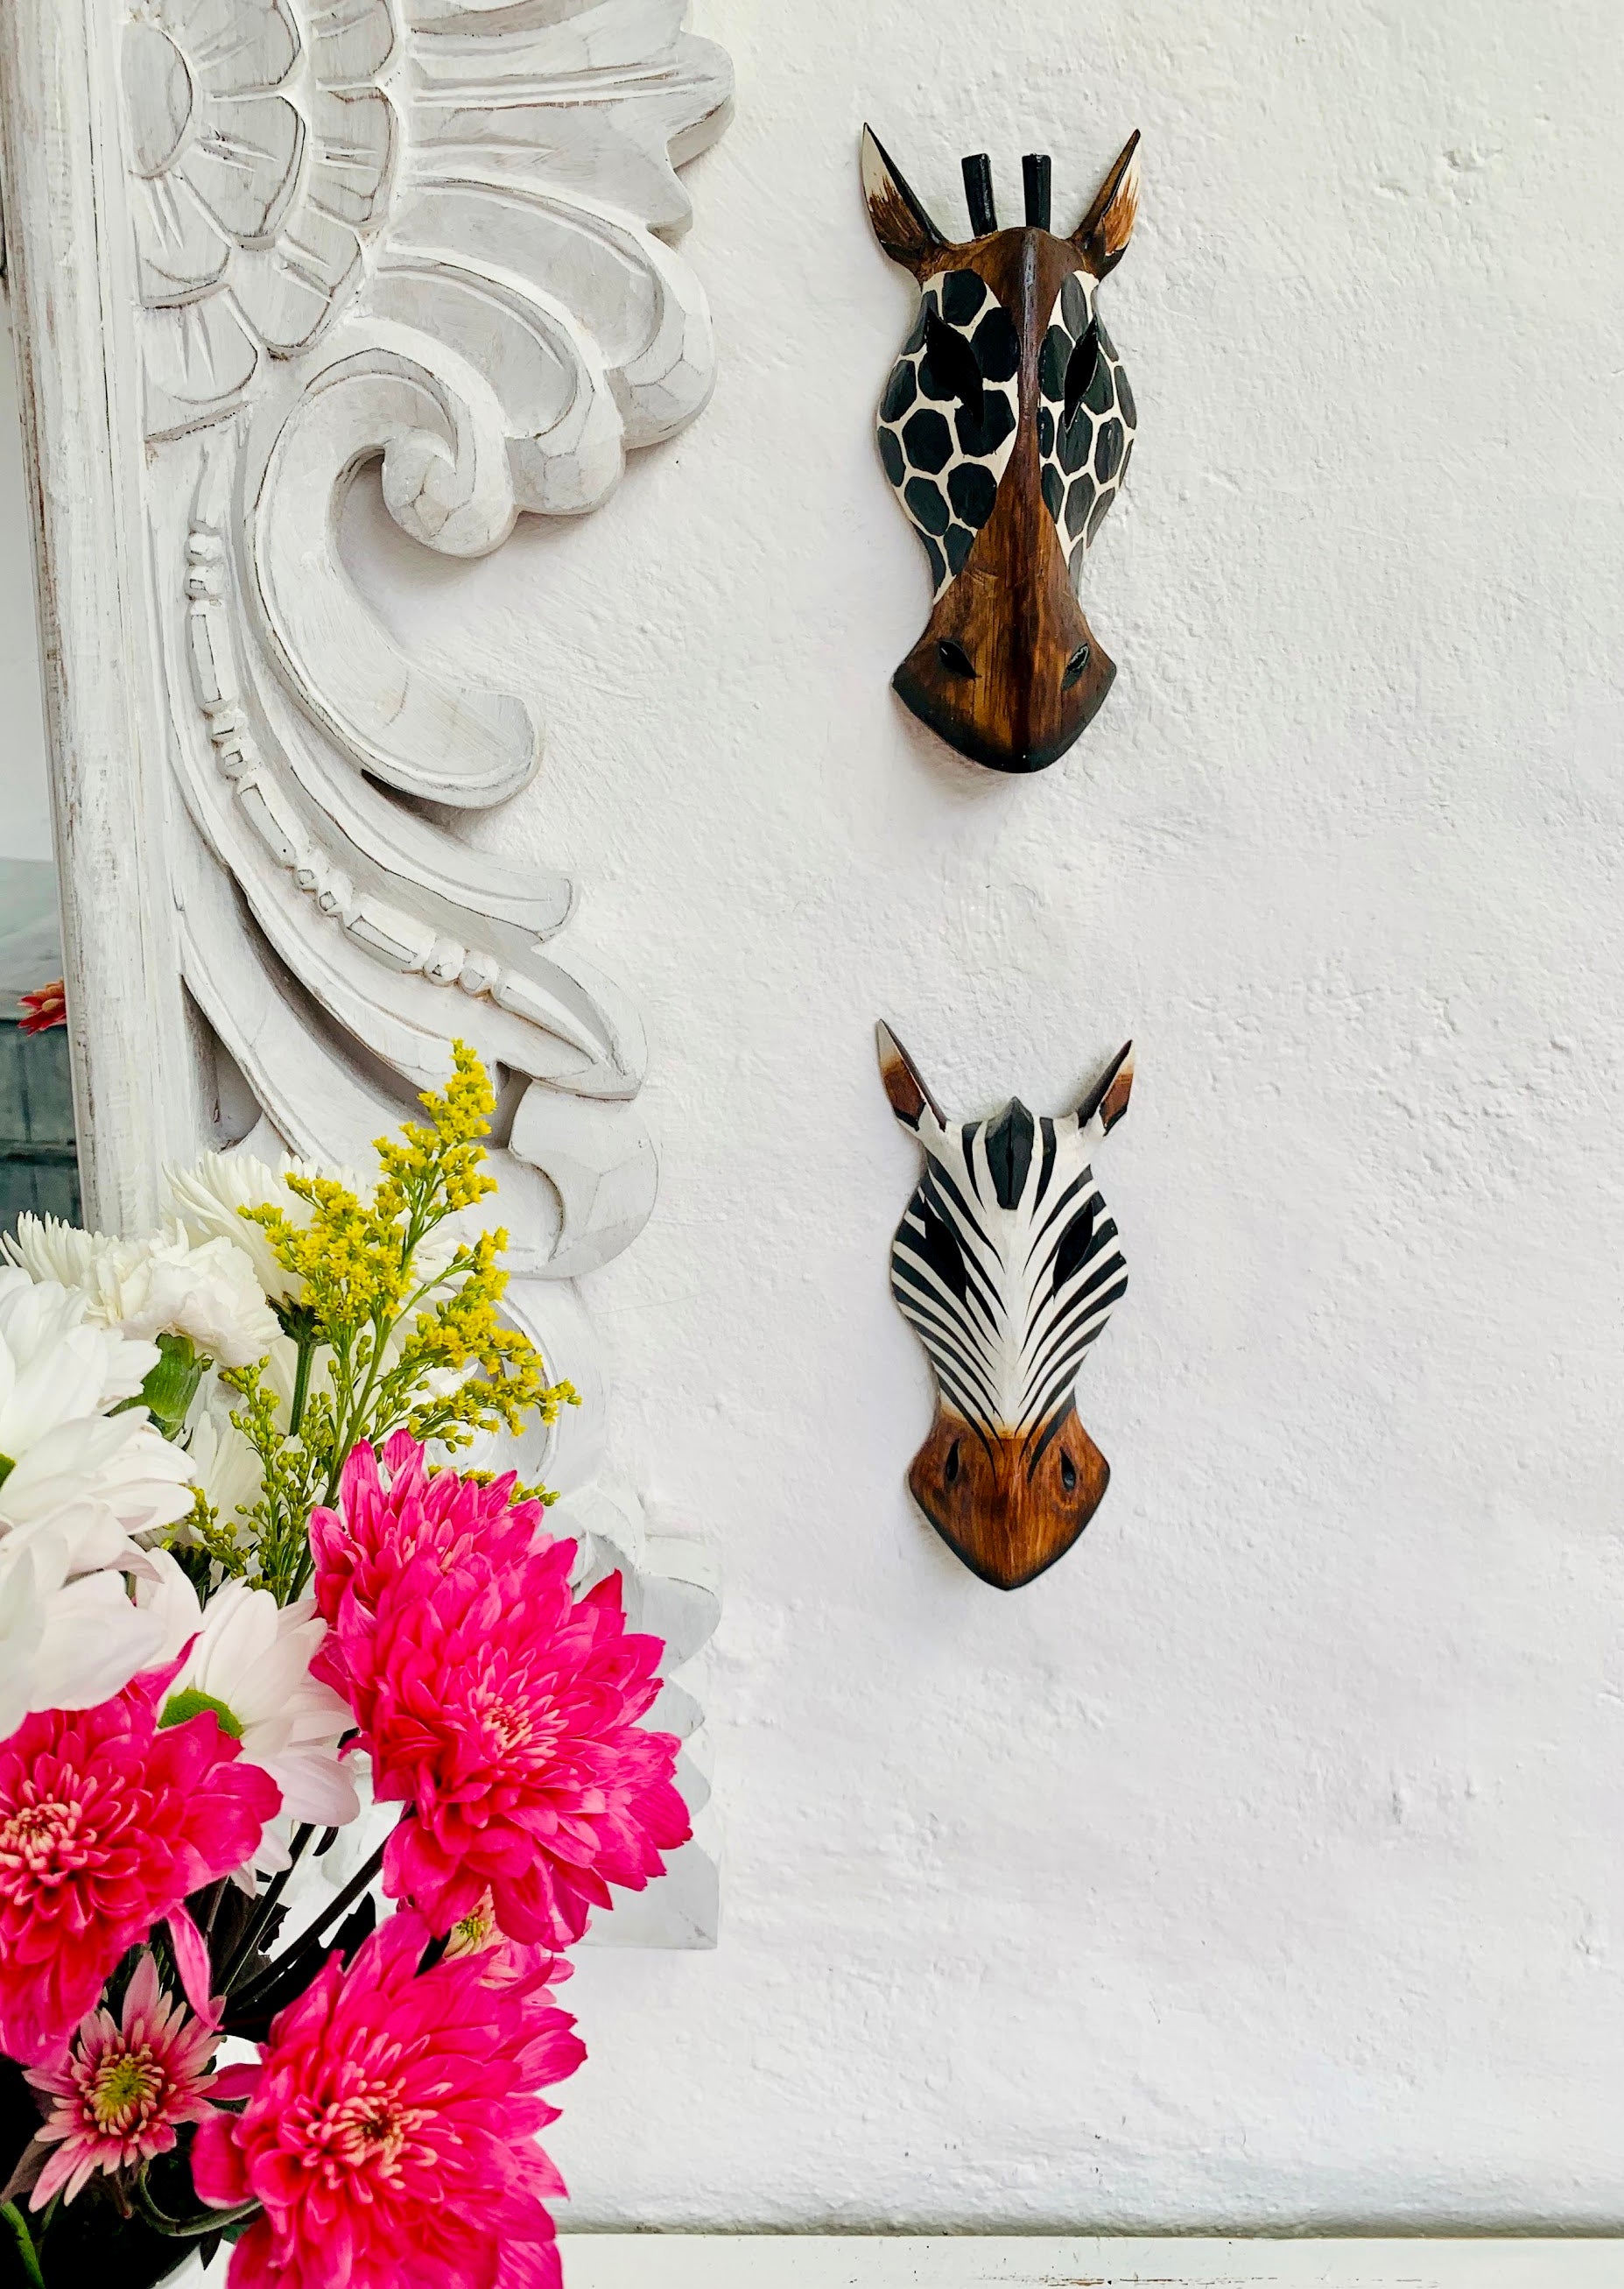 set display view of two zebra and giraffe wooden masks